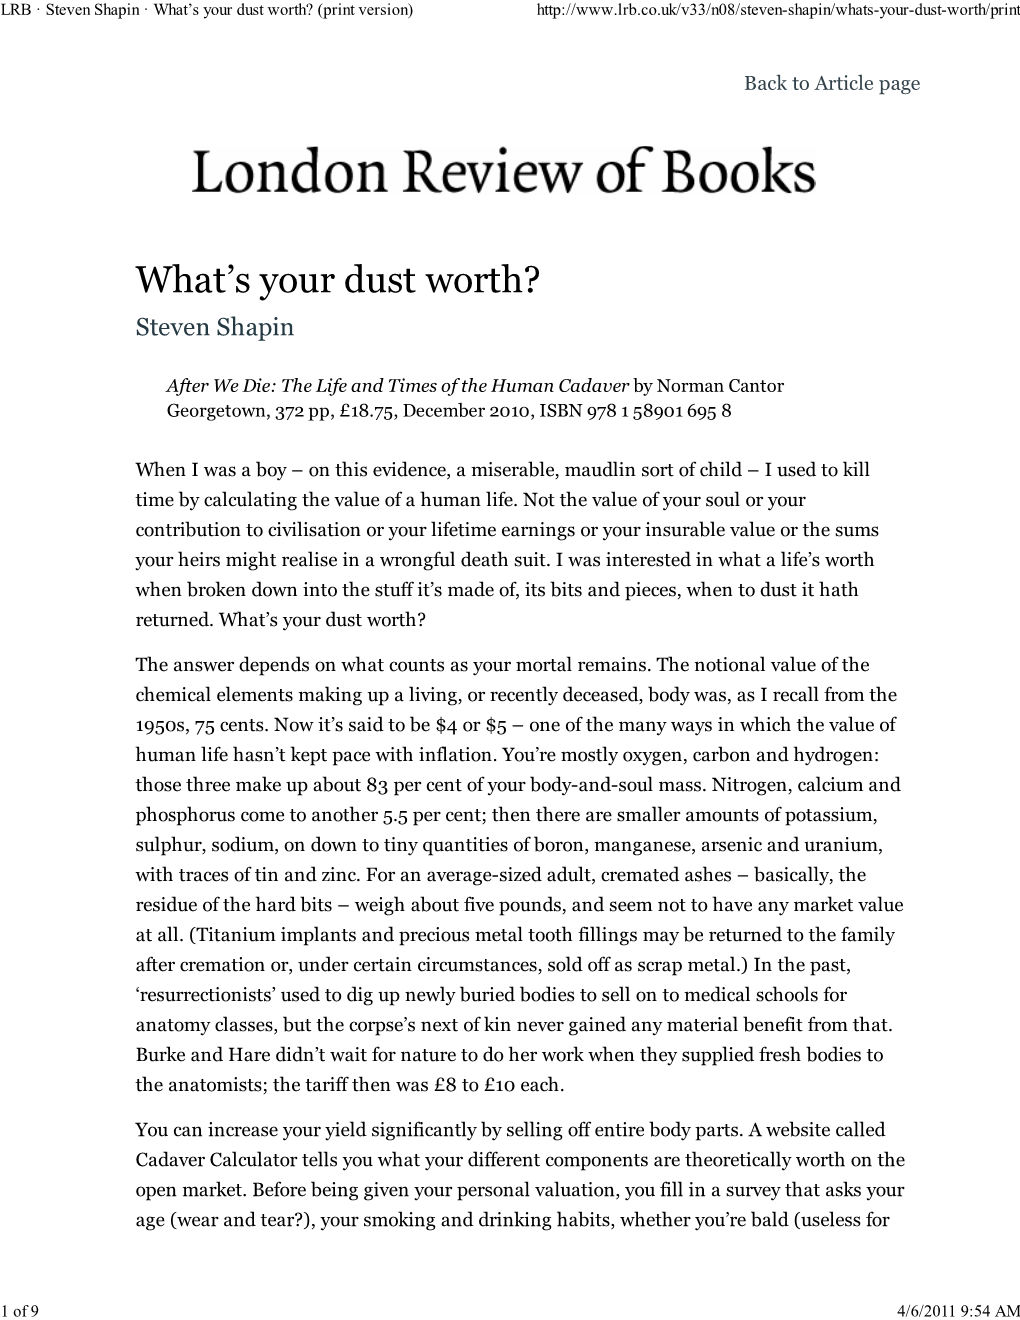 LRB · Steven Shapin · What's Your Dust Worth? (Print Version)